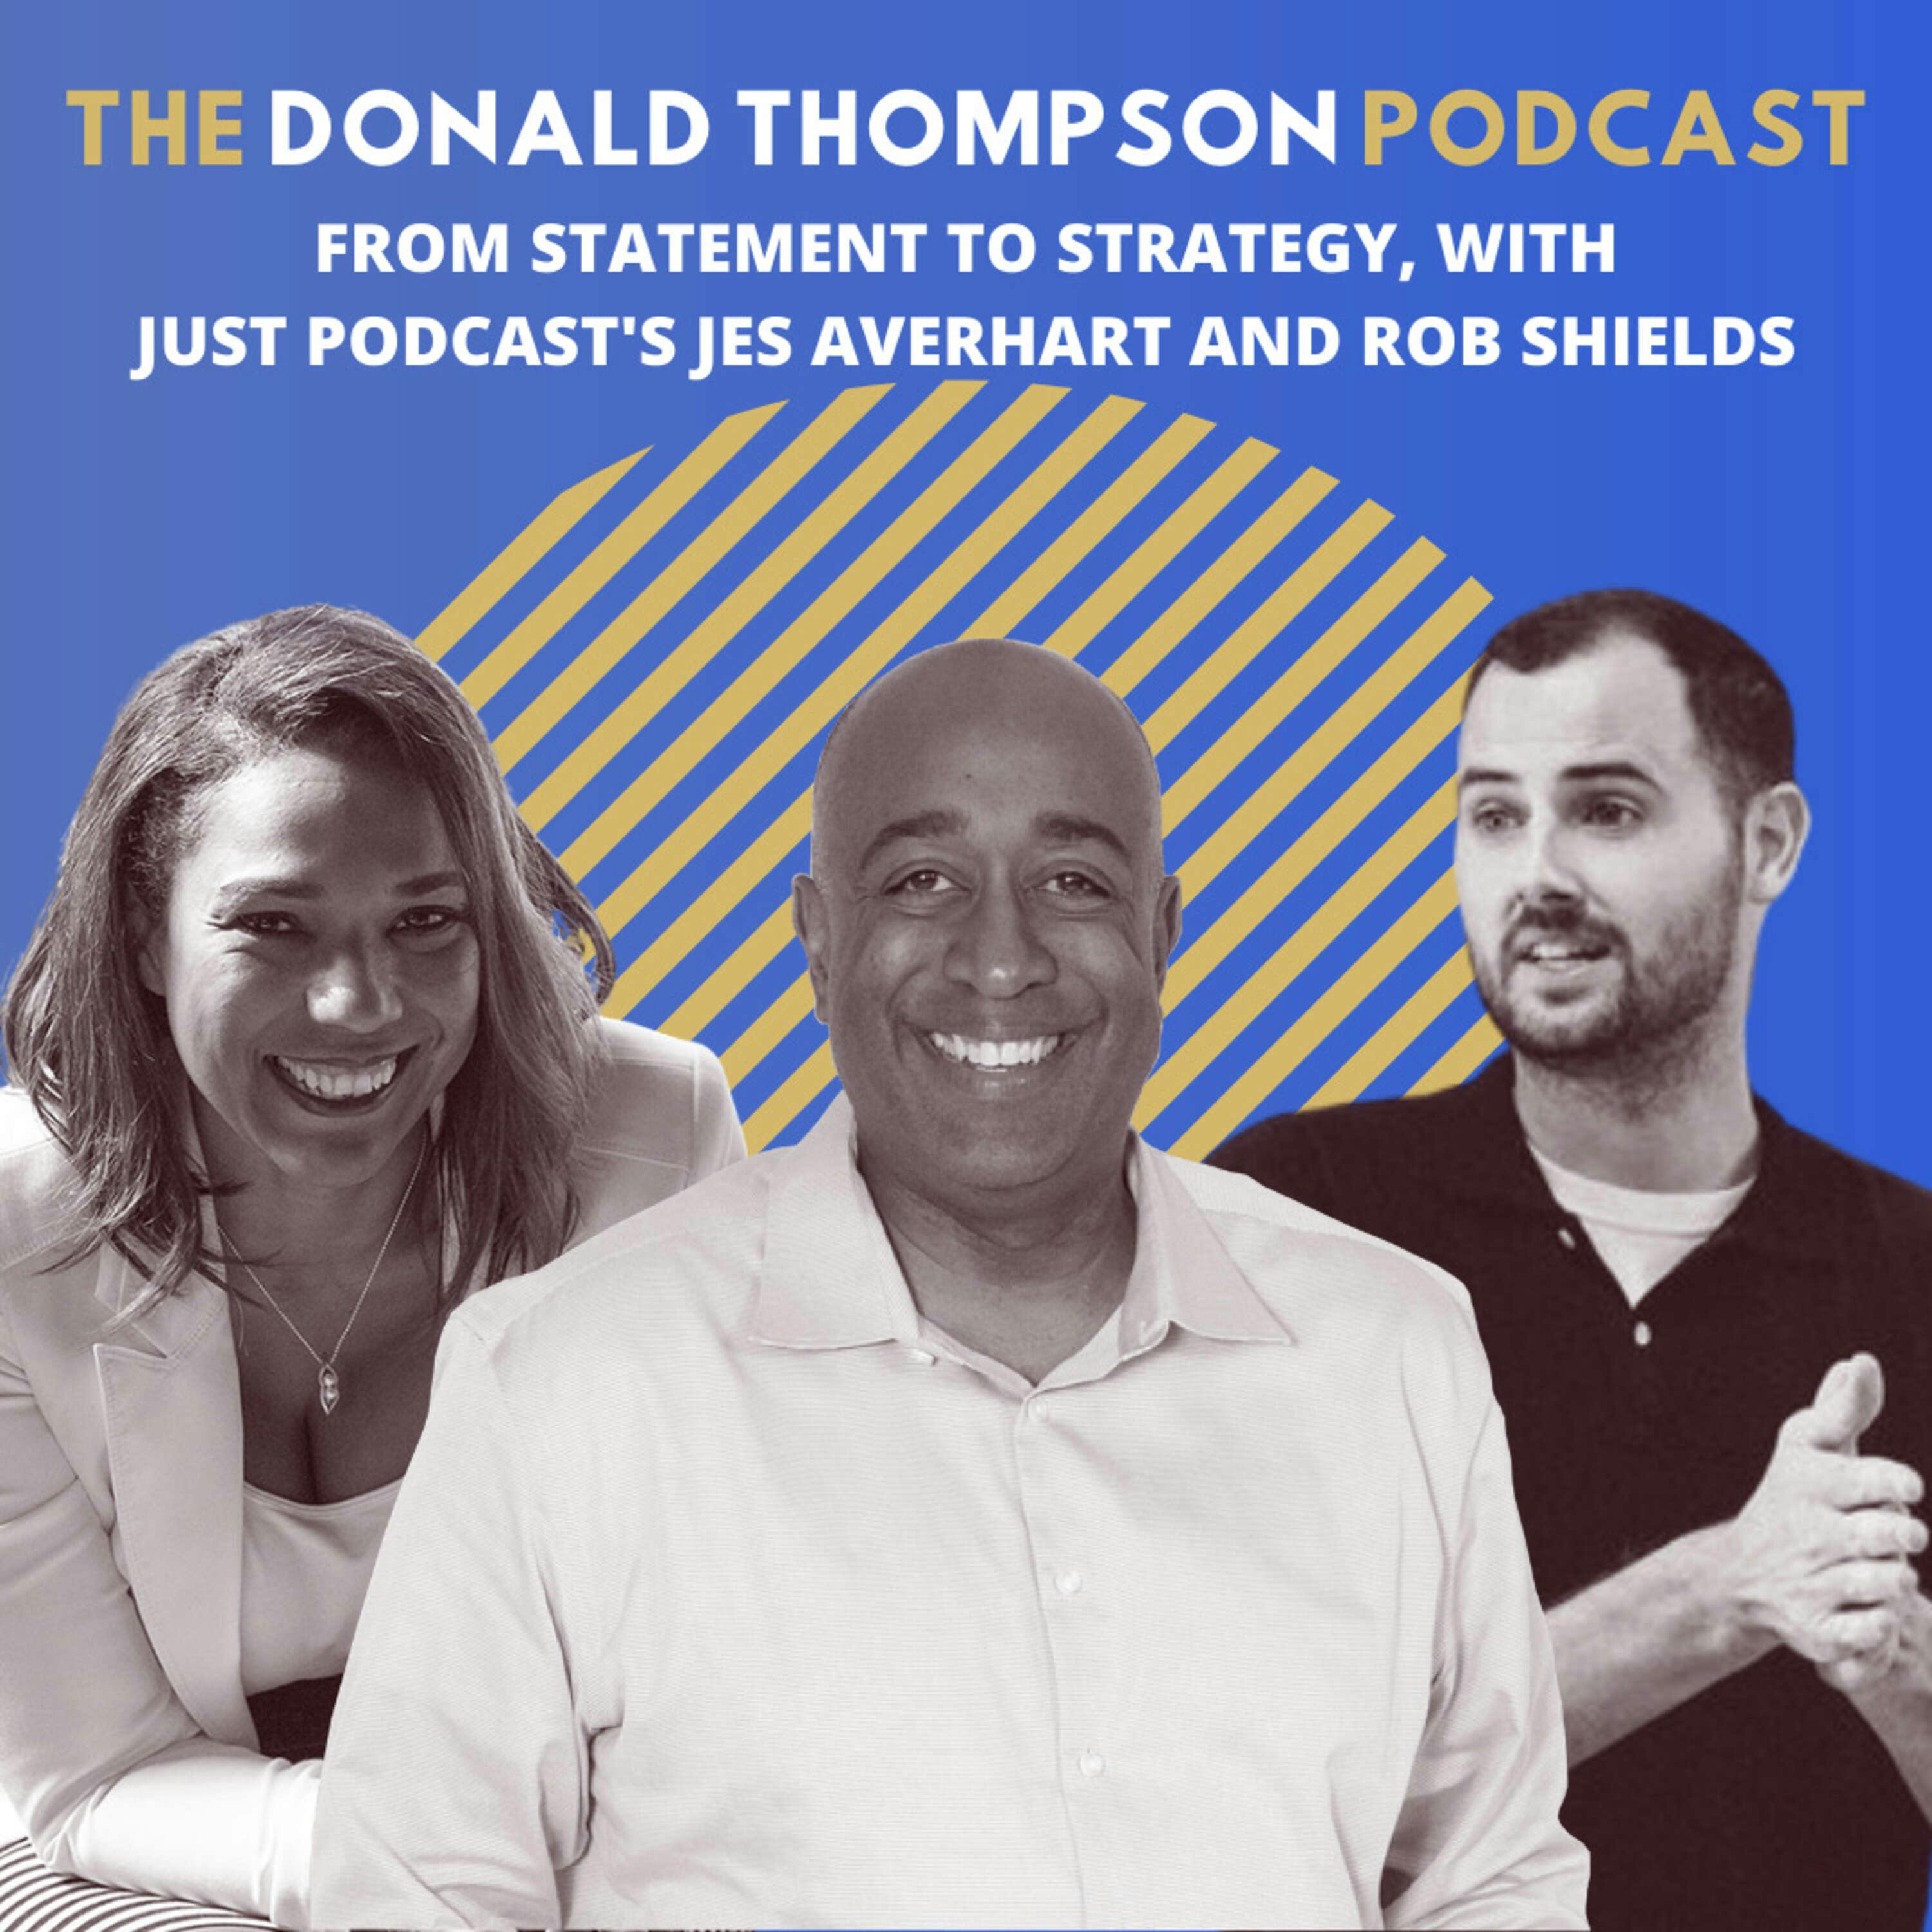 From Statement to Strategy, with JUST Podcast’s Jes Averhart and Rob Shields